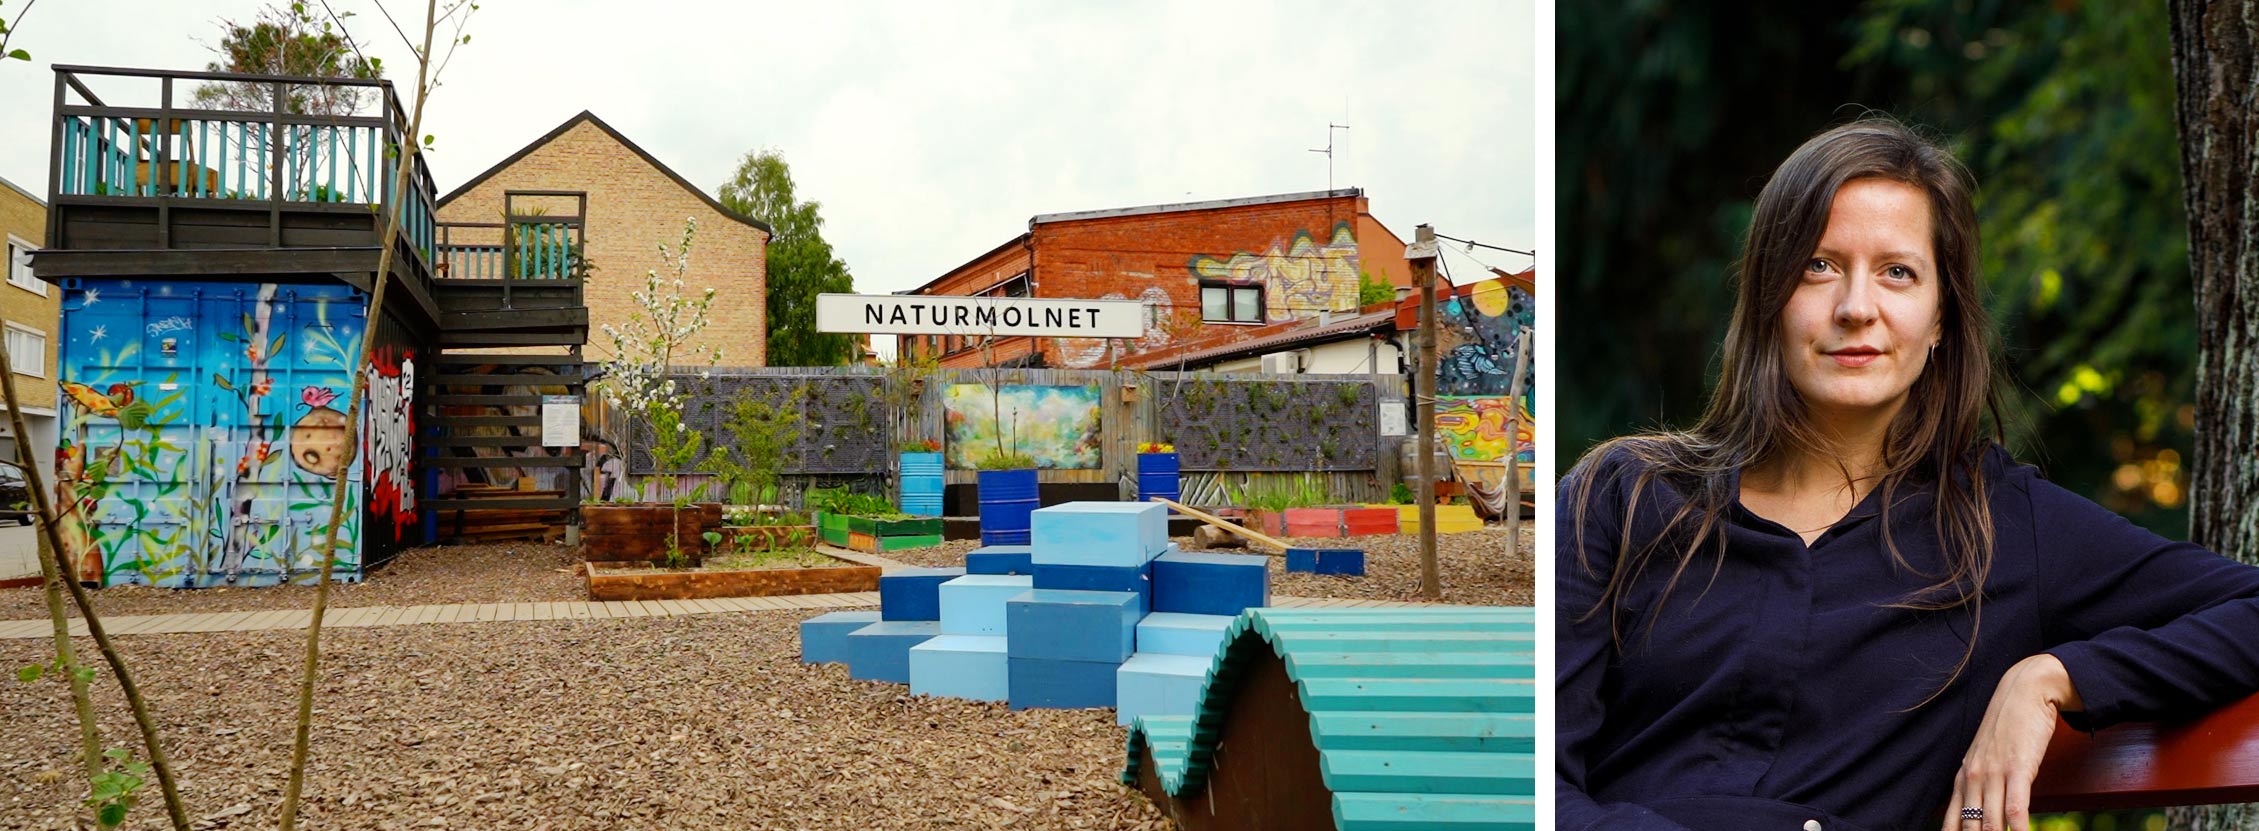 Two pictures, one of a playground with the a sign "Naturmolnet" and a portrait of Nina Fogel.